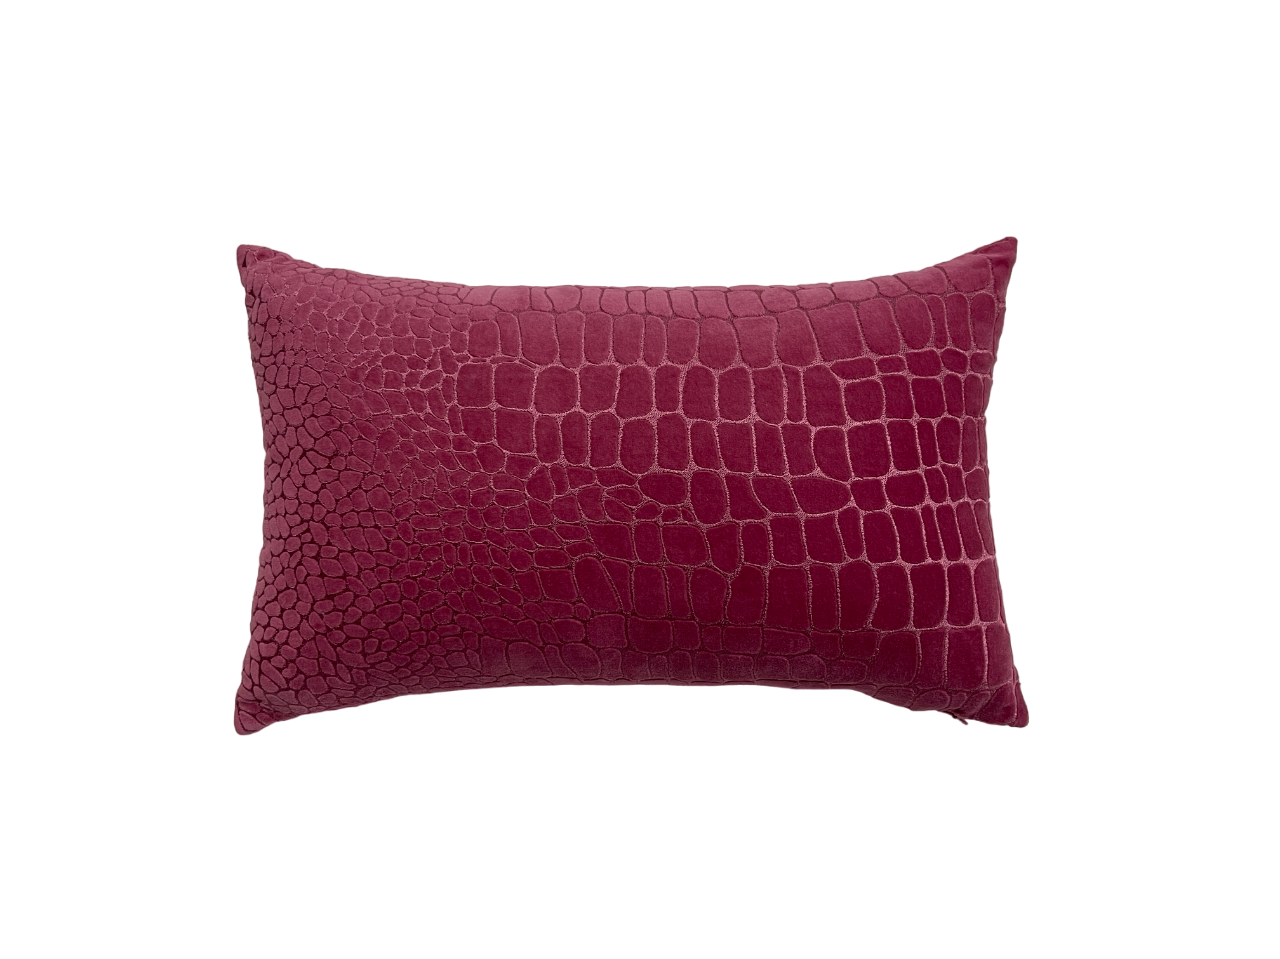 Wild Luxury Velvet Embroidered Old Rose Cushion Cover